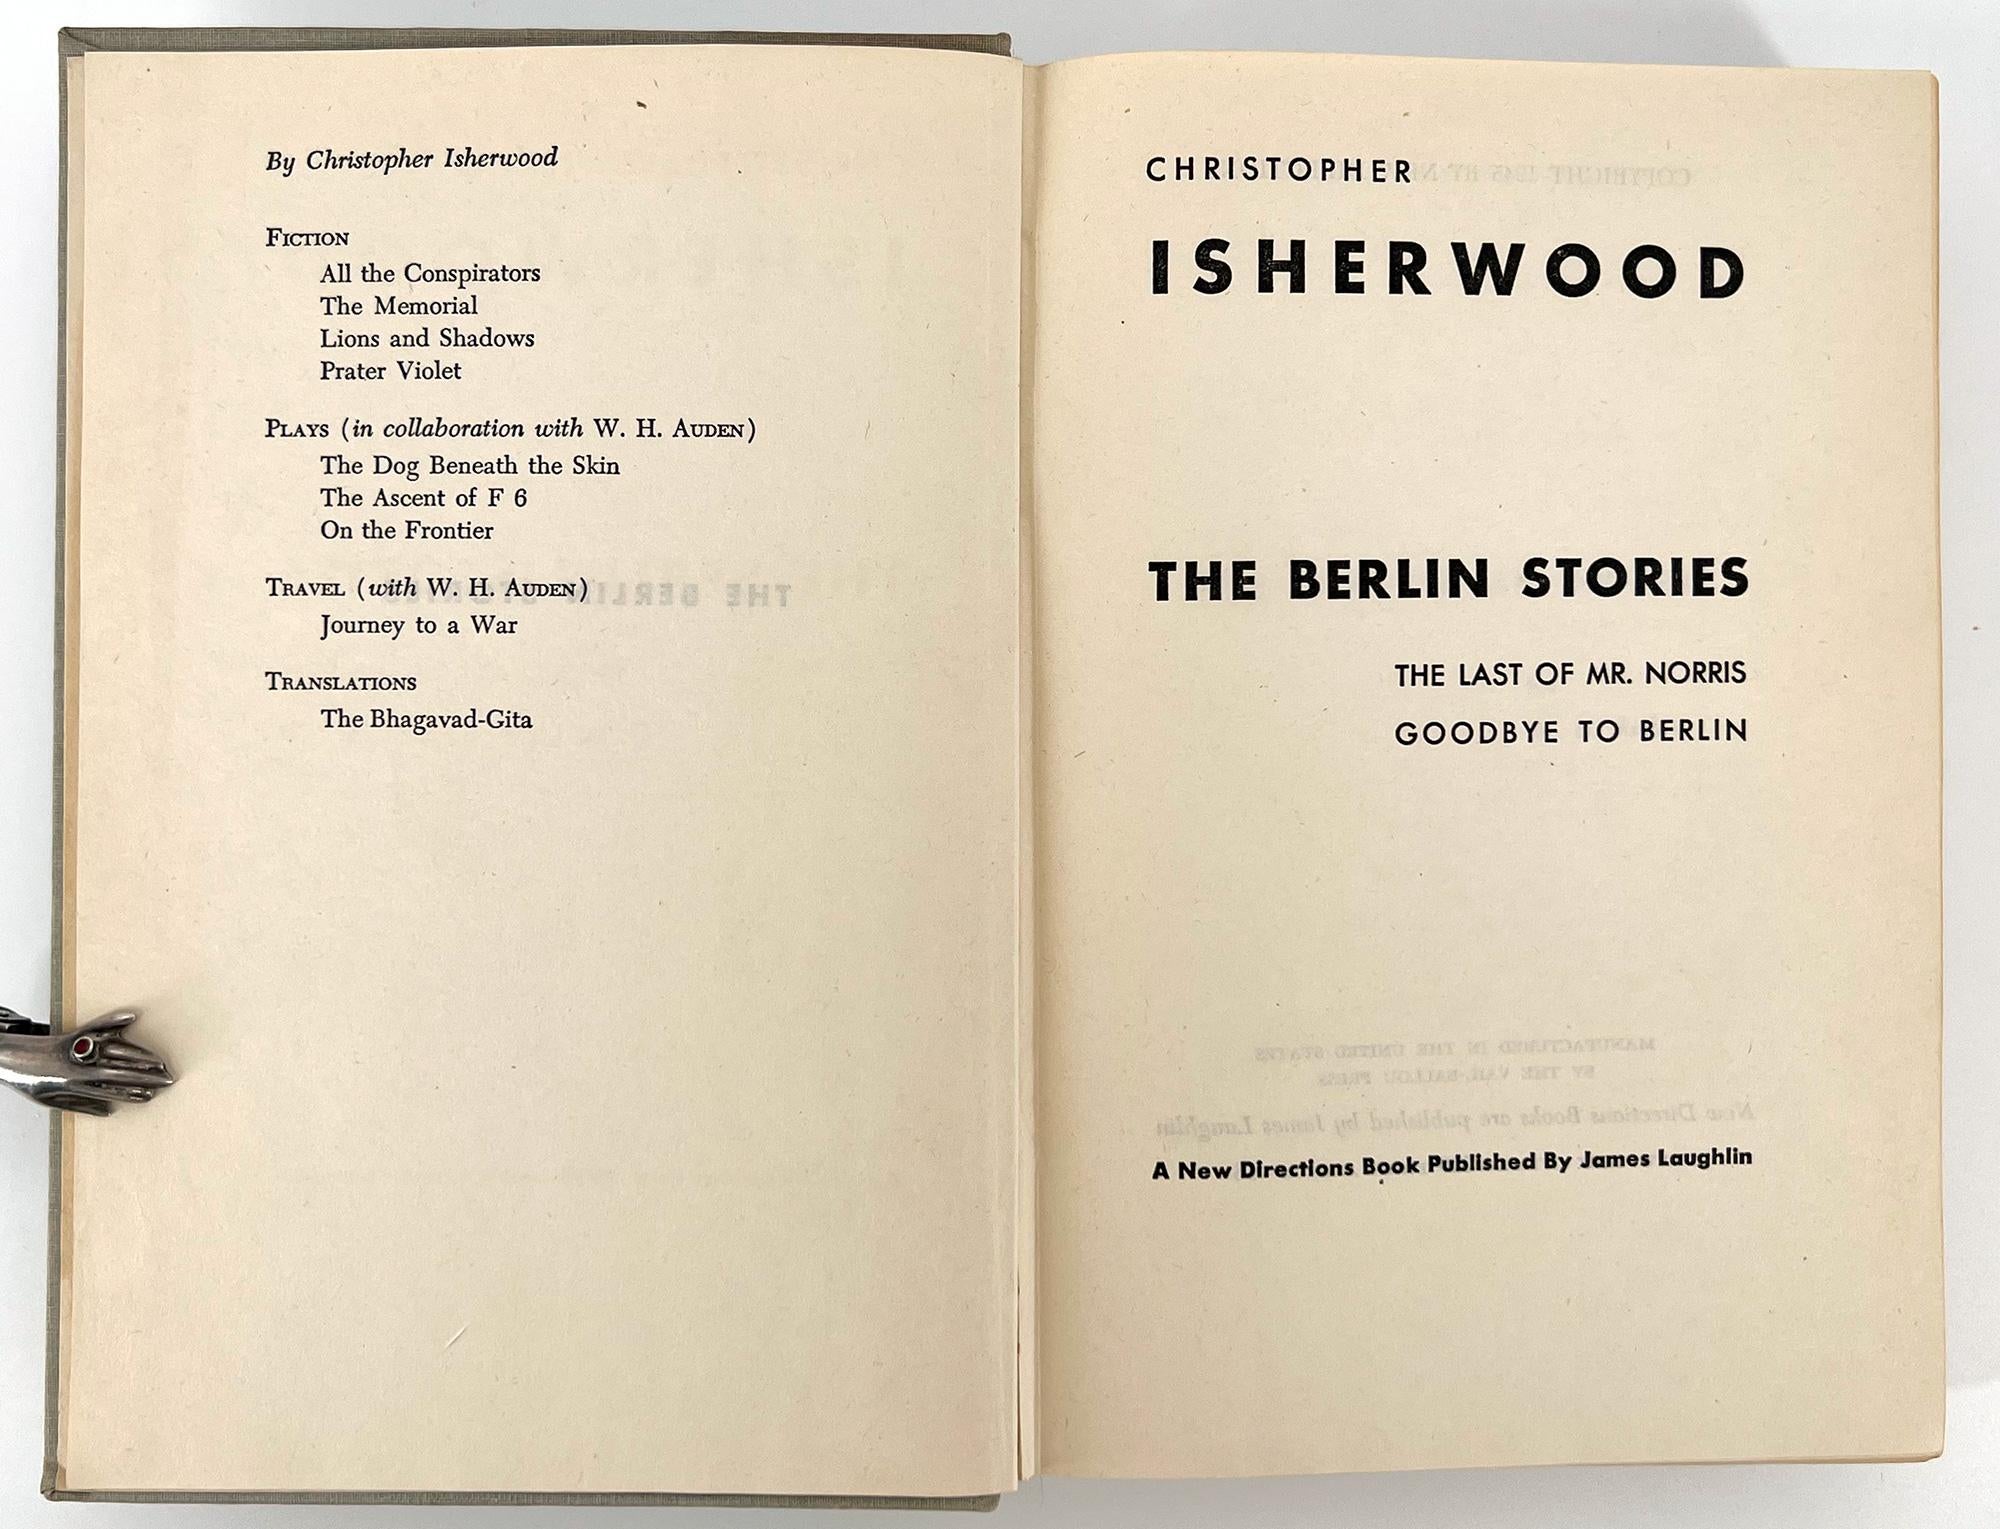 This American edition of Isherwood's two novels [The Last of Mr. Norris and Goodbye Berlin] set in Weimar-era Berlin, were originally published by the Hogarth Press (1935 & 1939). They form the basis for the Oscar-winning film, Cabaret, that starred